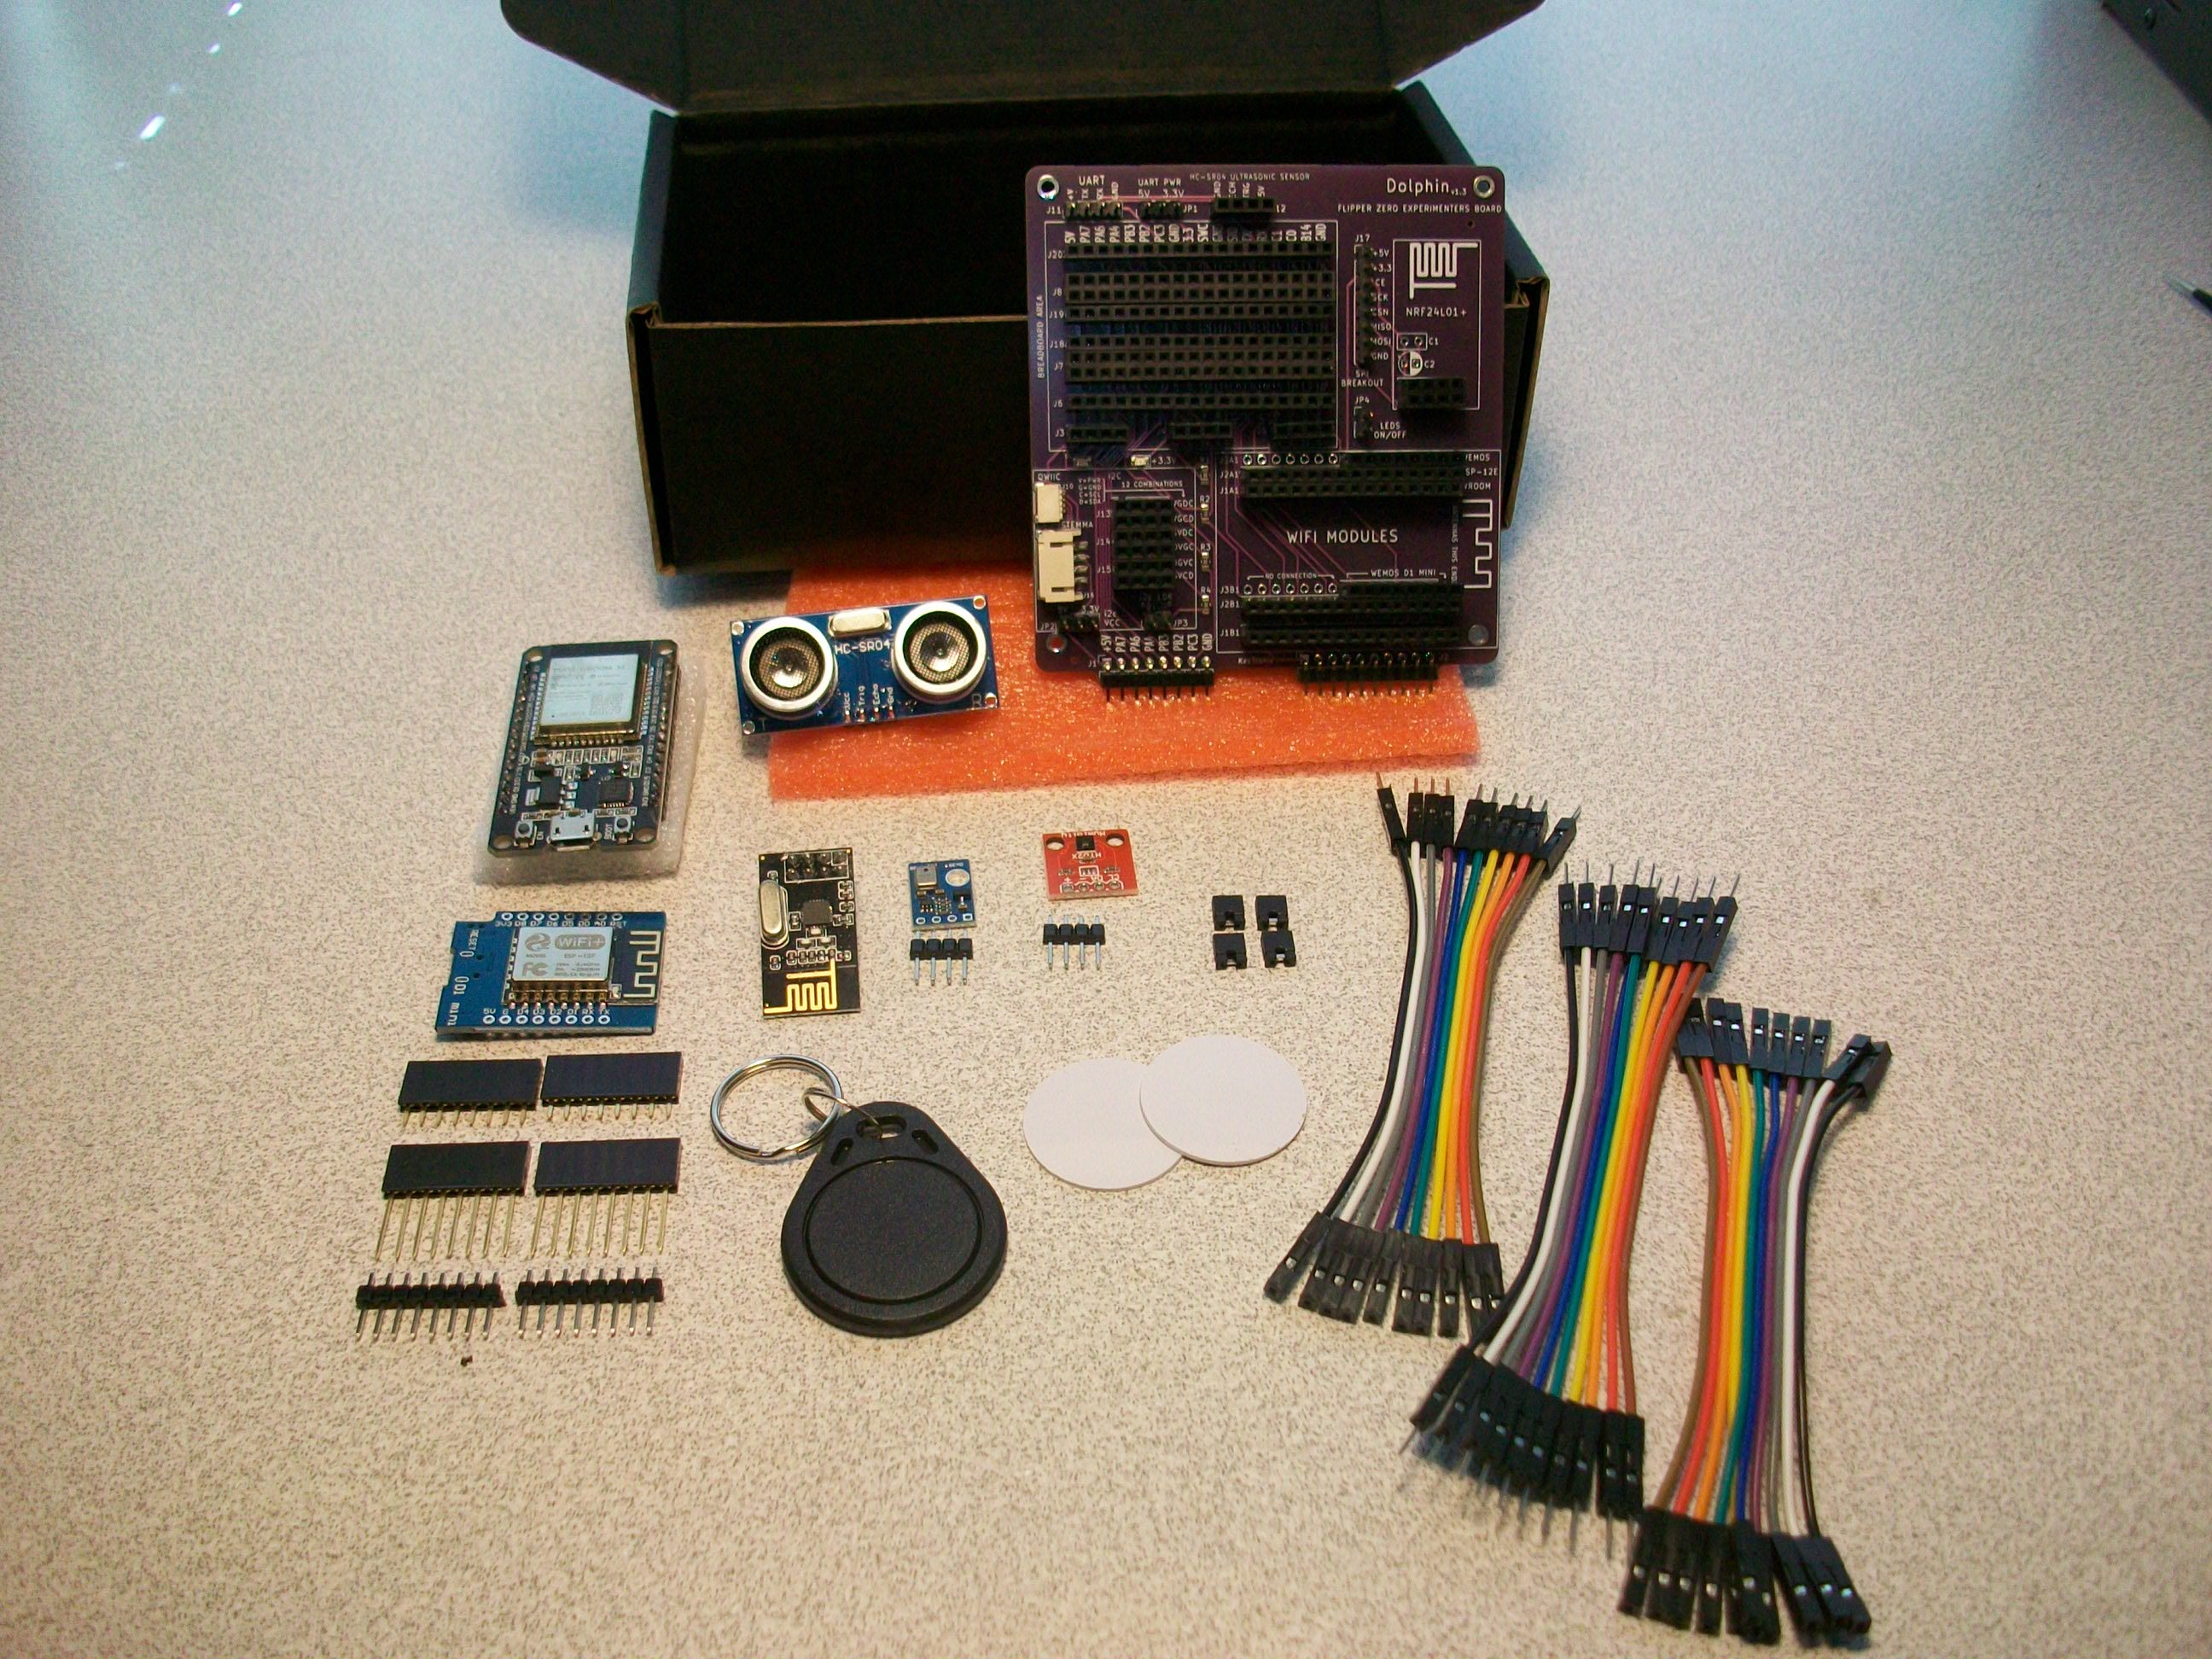 Dolphin experimenters kit for testing and prototyping. Designed